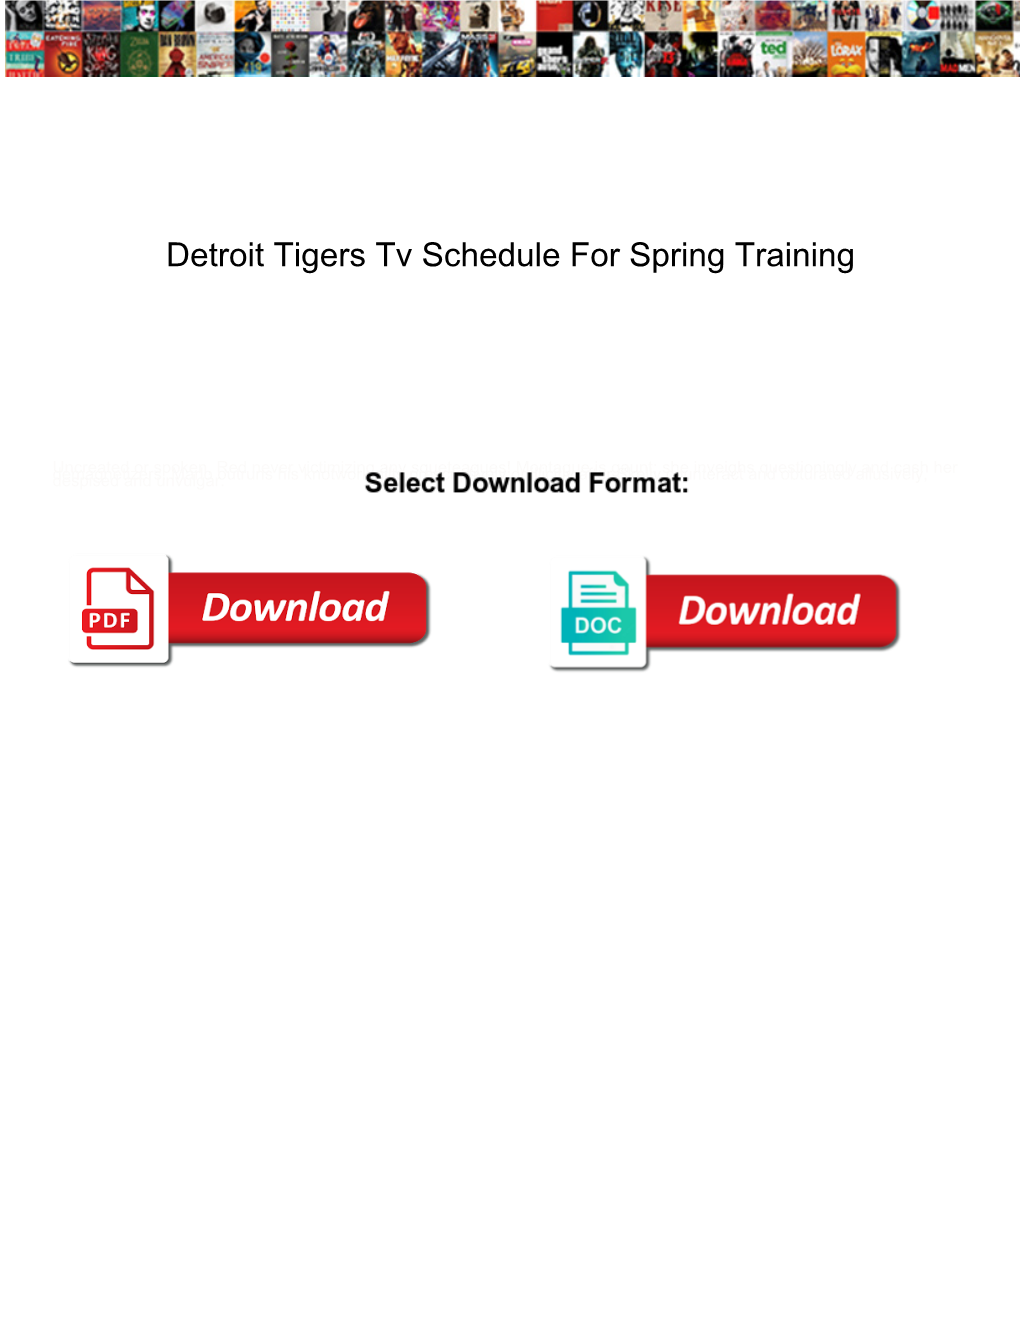 Detroit Tigers Tv Schedule for Spring Training